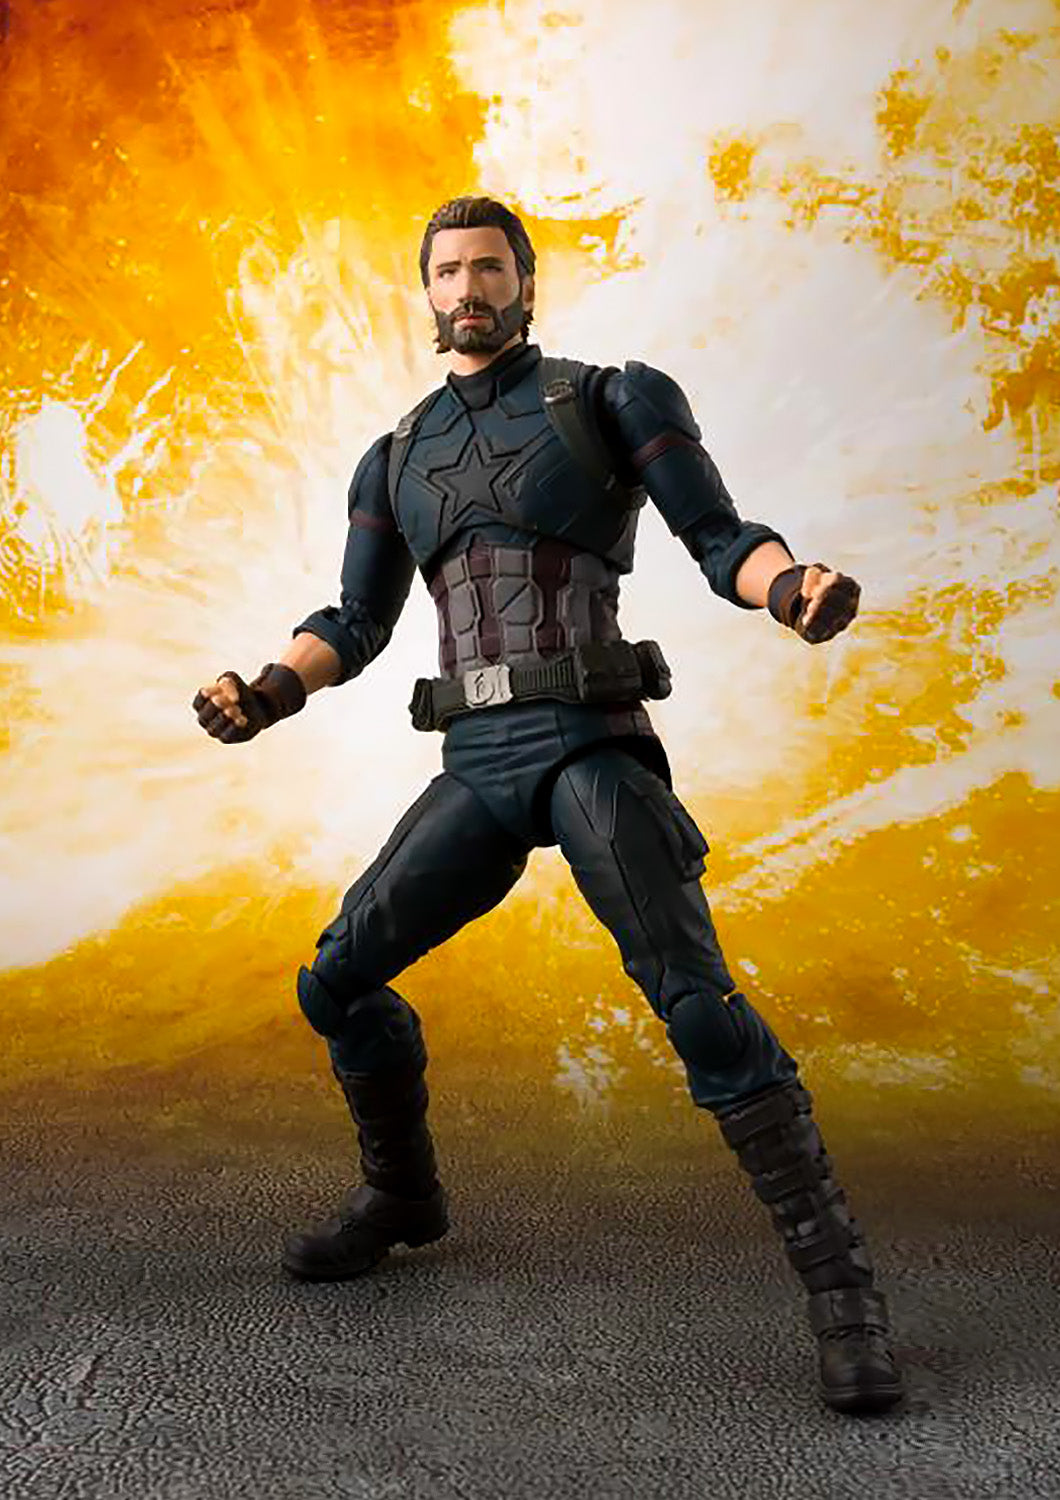 SH FIGUARTS AVENGERS INFINITY WAR CAPTAIN AMERICA & TAMASHII EFFECT EXPLOSION - SHF27626 - Anotoys Collectibles